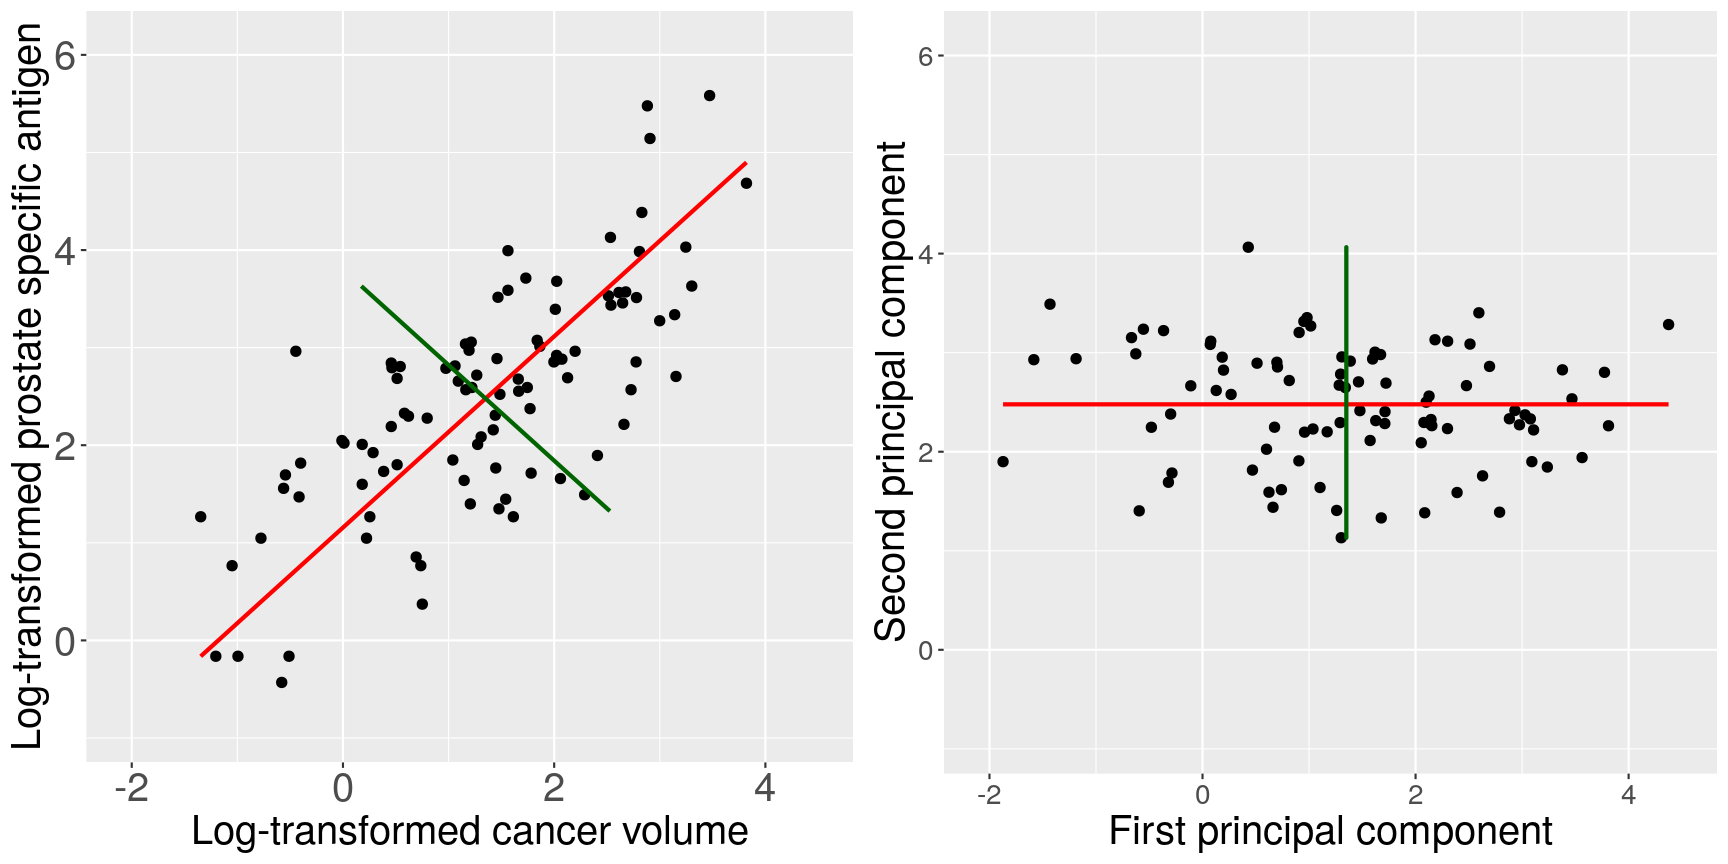 Side-by-side scatter plots of the prostate data. The left figure displays a scatter plot of the log prostate specific antigen versus the log cancer volume. The first principal component is shown by a red line and the second principal component is shown by a green line. The right figure displays the same scatter plot rotated so that the first principal component is horizontal and the second principal component is shown perpendicular to this.